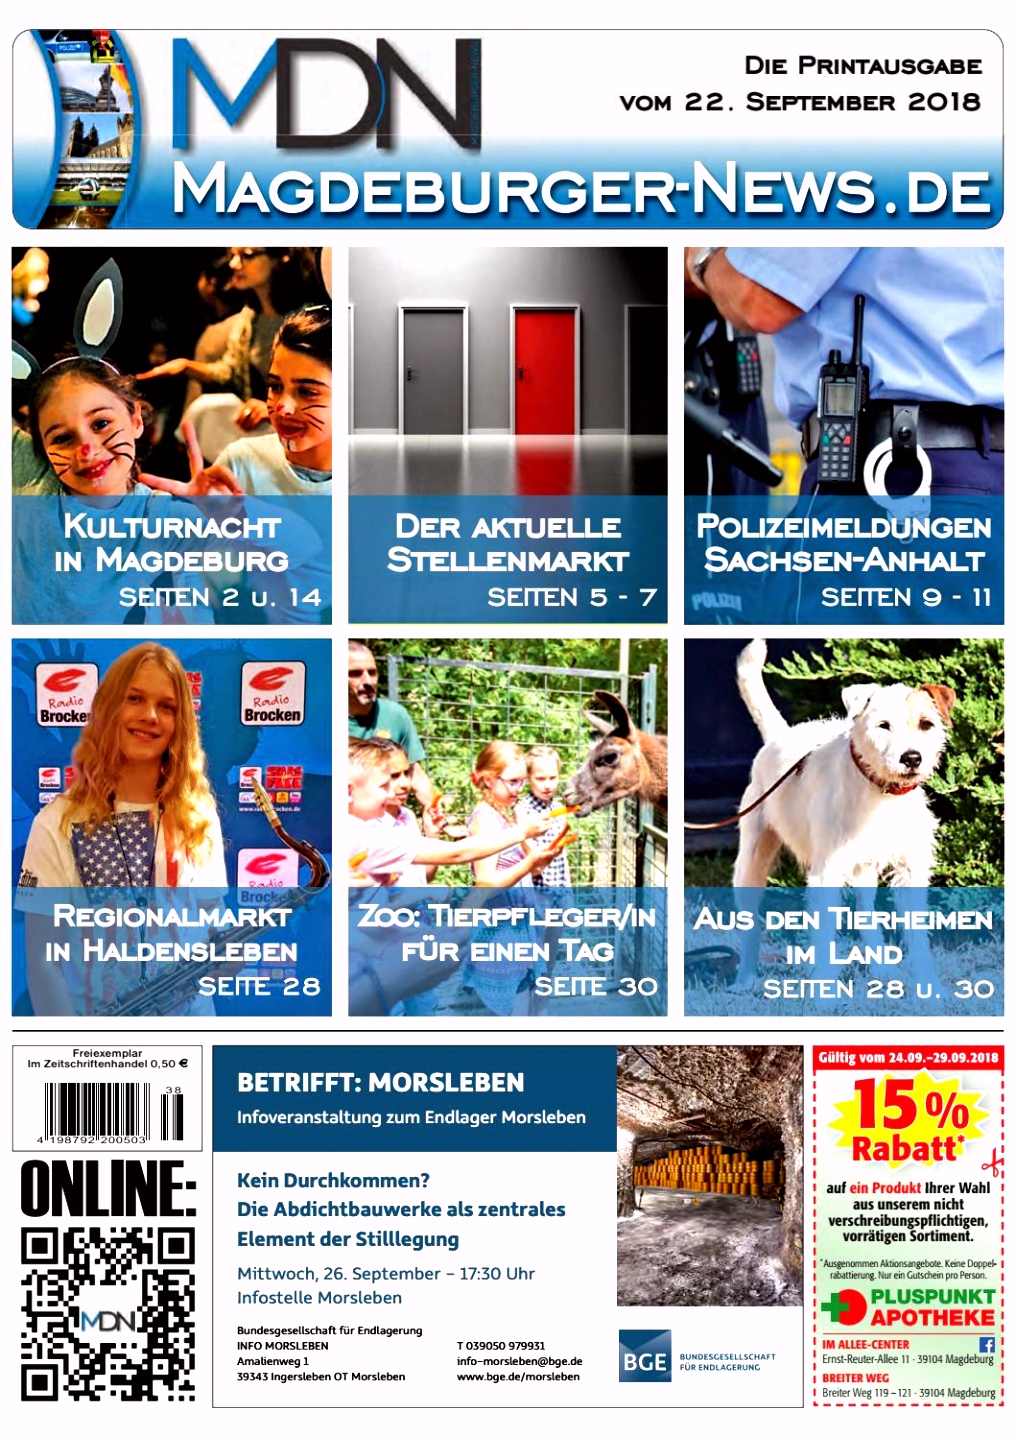 MAGDEBURGER NEWS DE by mdnews18 issuu